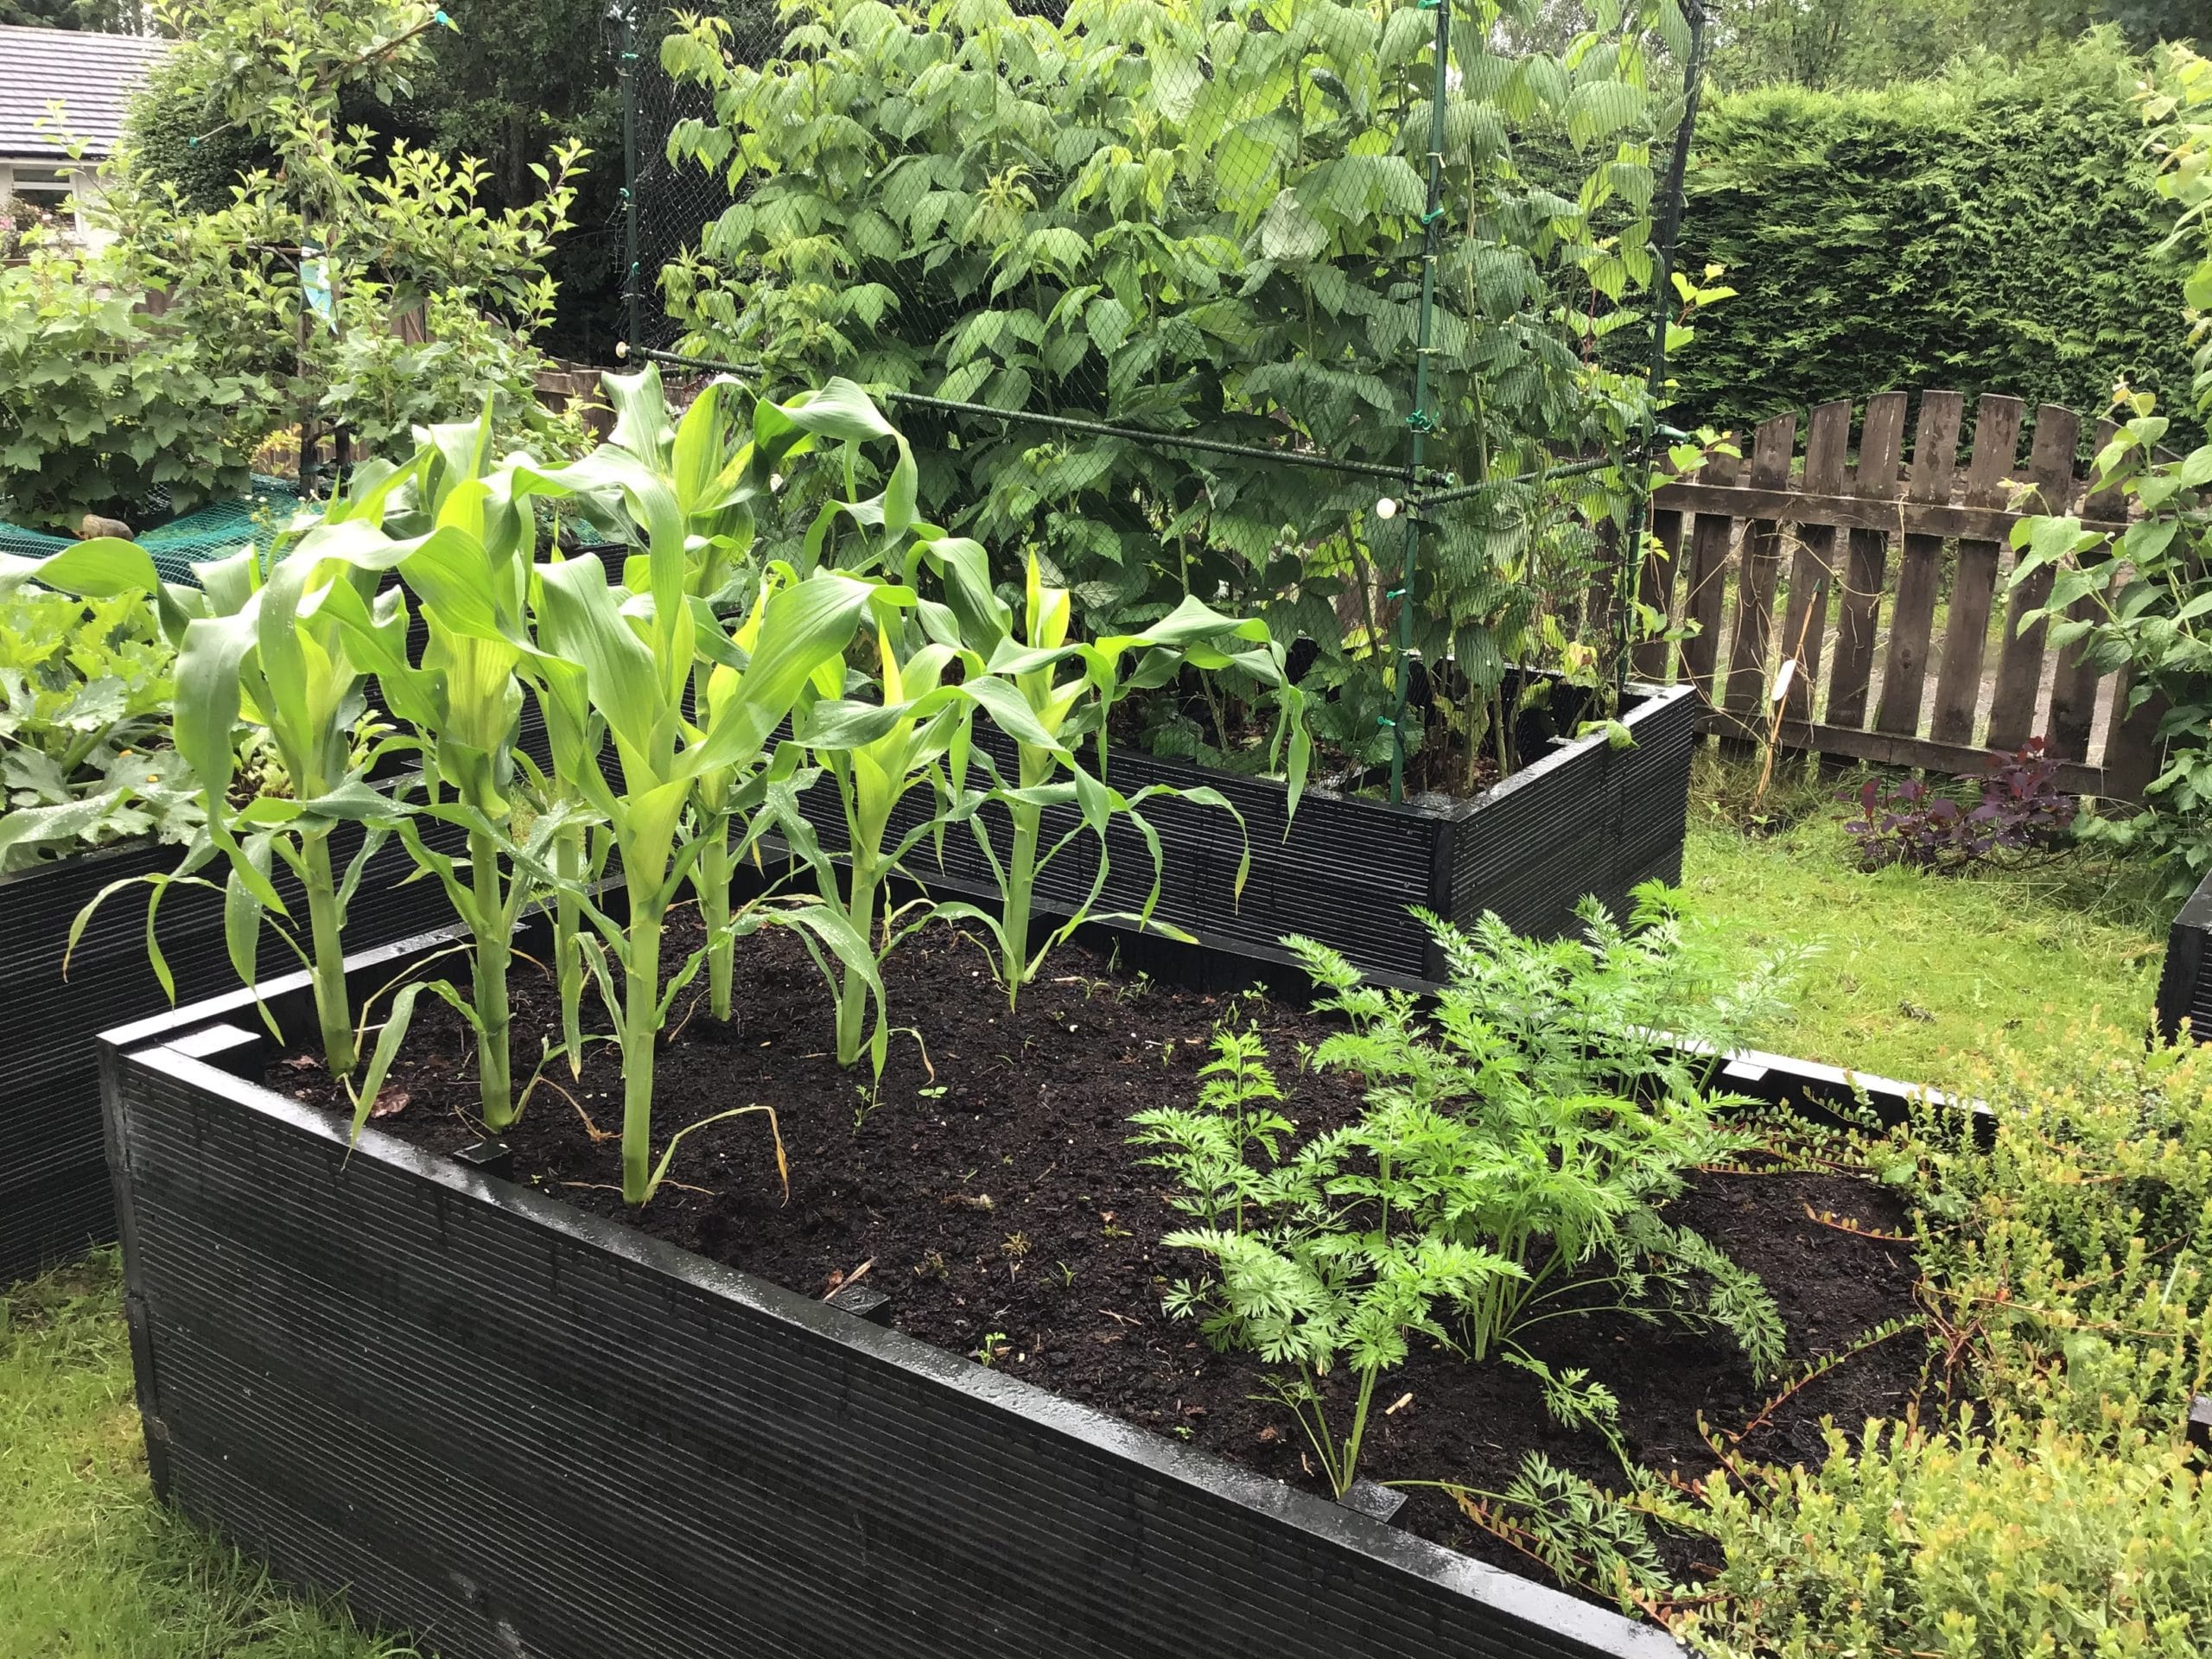 Plants growing in raised beds